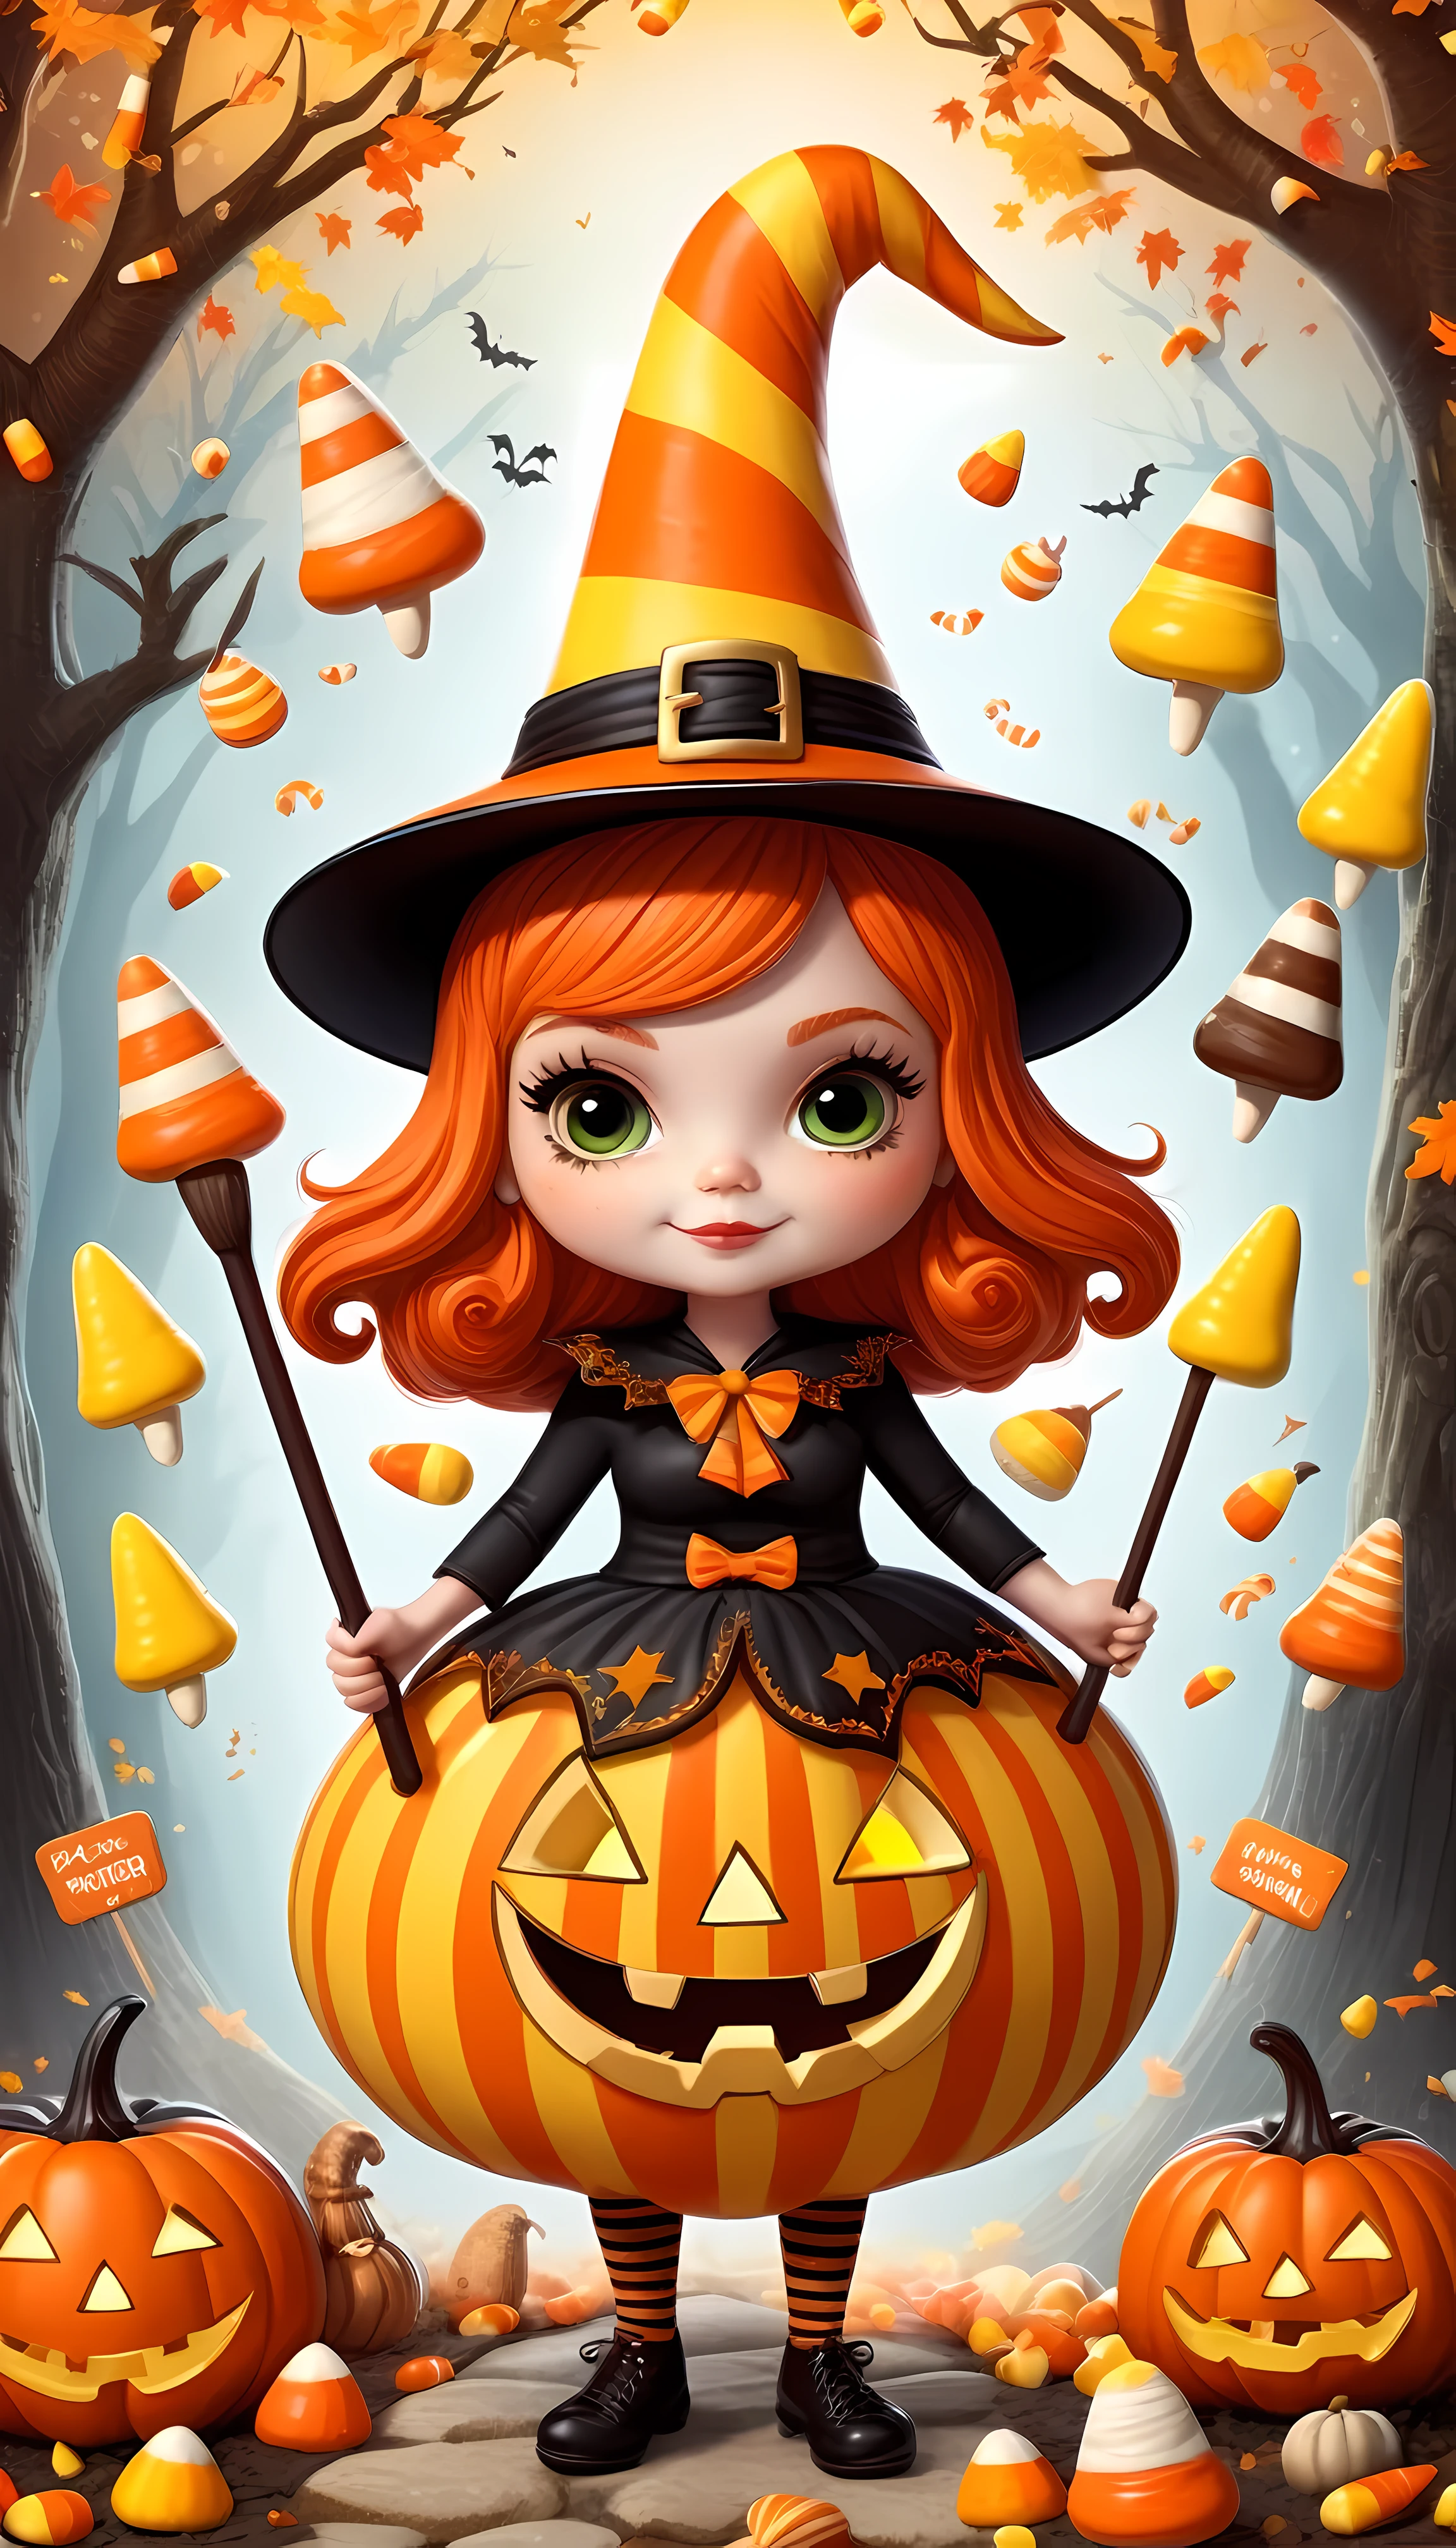 CuteCartoonAF, Cute Cartoon, masterpiece in maximum 16K resolution, superb quality, (a big sticker) on the modern fridge, designed as a whimsical Candy Corn Witch dressed in an outfit with candy corn and a holding a magical staff, surrounded with miniature whimsical elements such a candy corn houses and frighteningly adorable creatures, the overall design evokes a sense of awe, magic, and Halloween wonder.